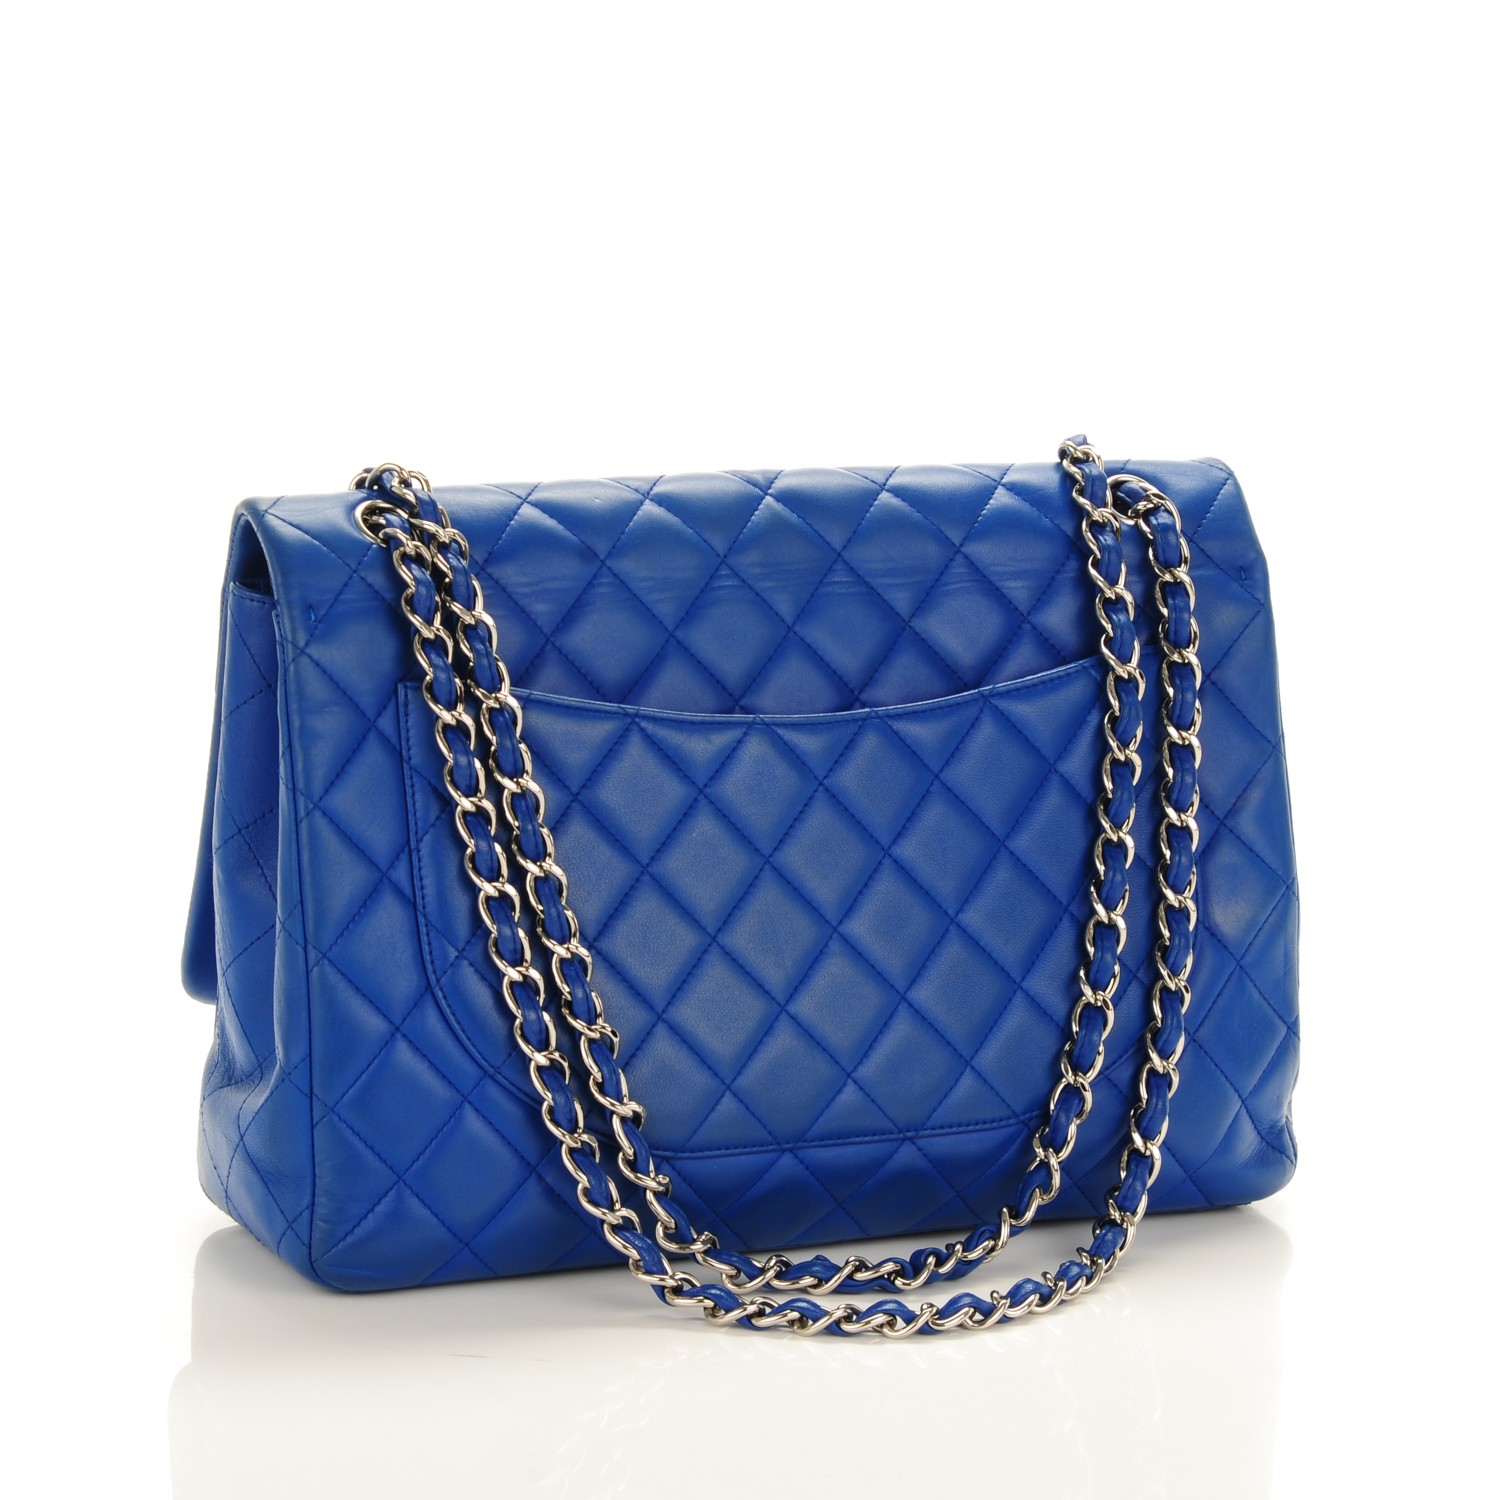 CHANEL Lambskin Quilted Maxi Single Flap Blue 167186